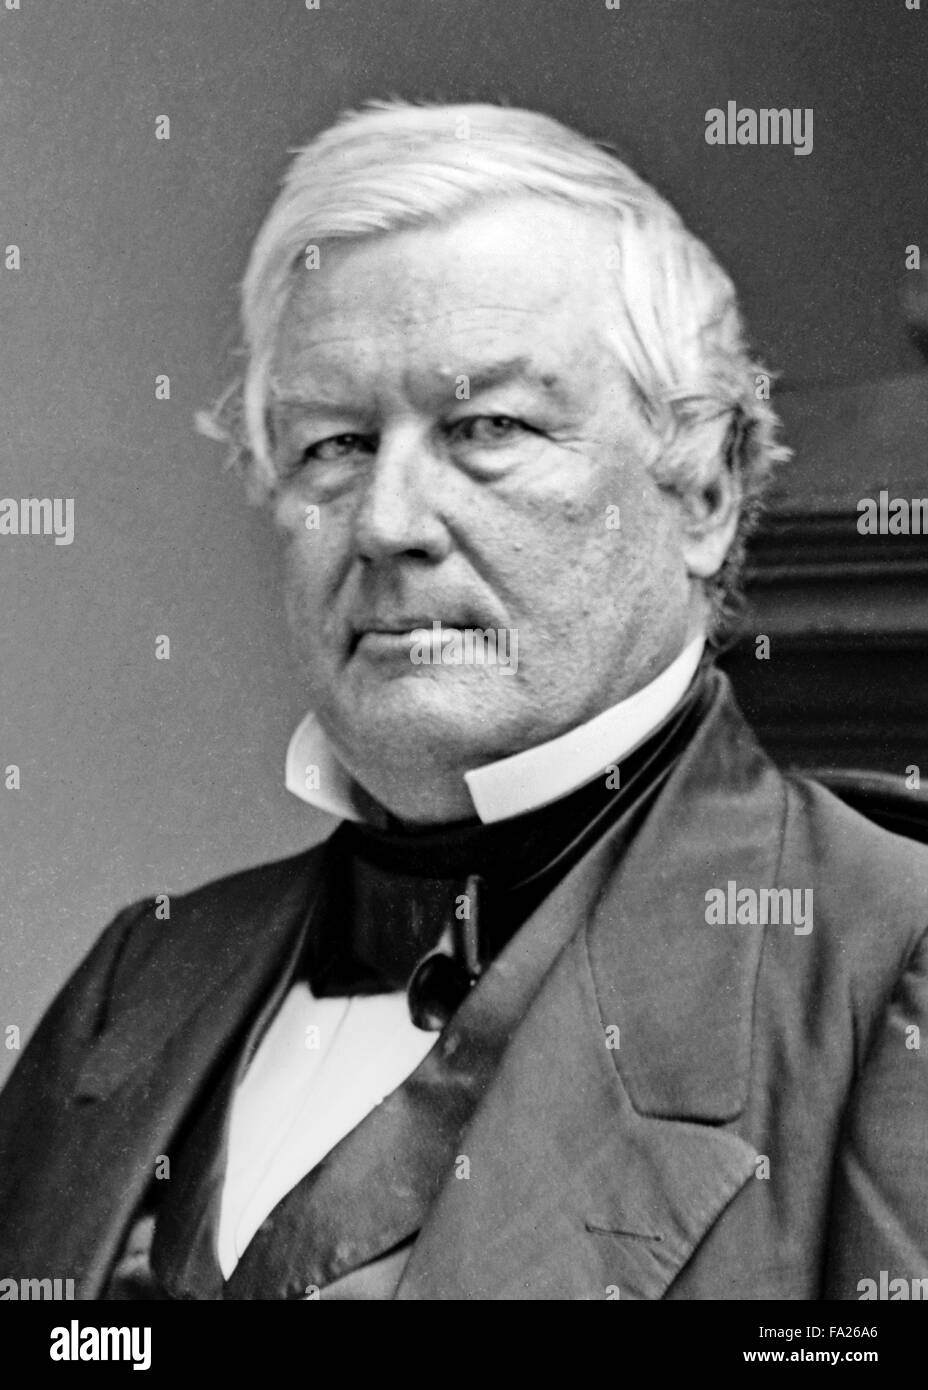 Millard Fillmore, the 13th President of the United States (1850–1853), Stock Photo